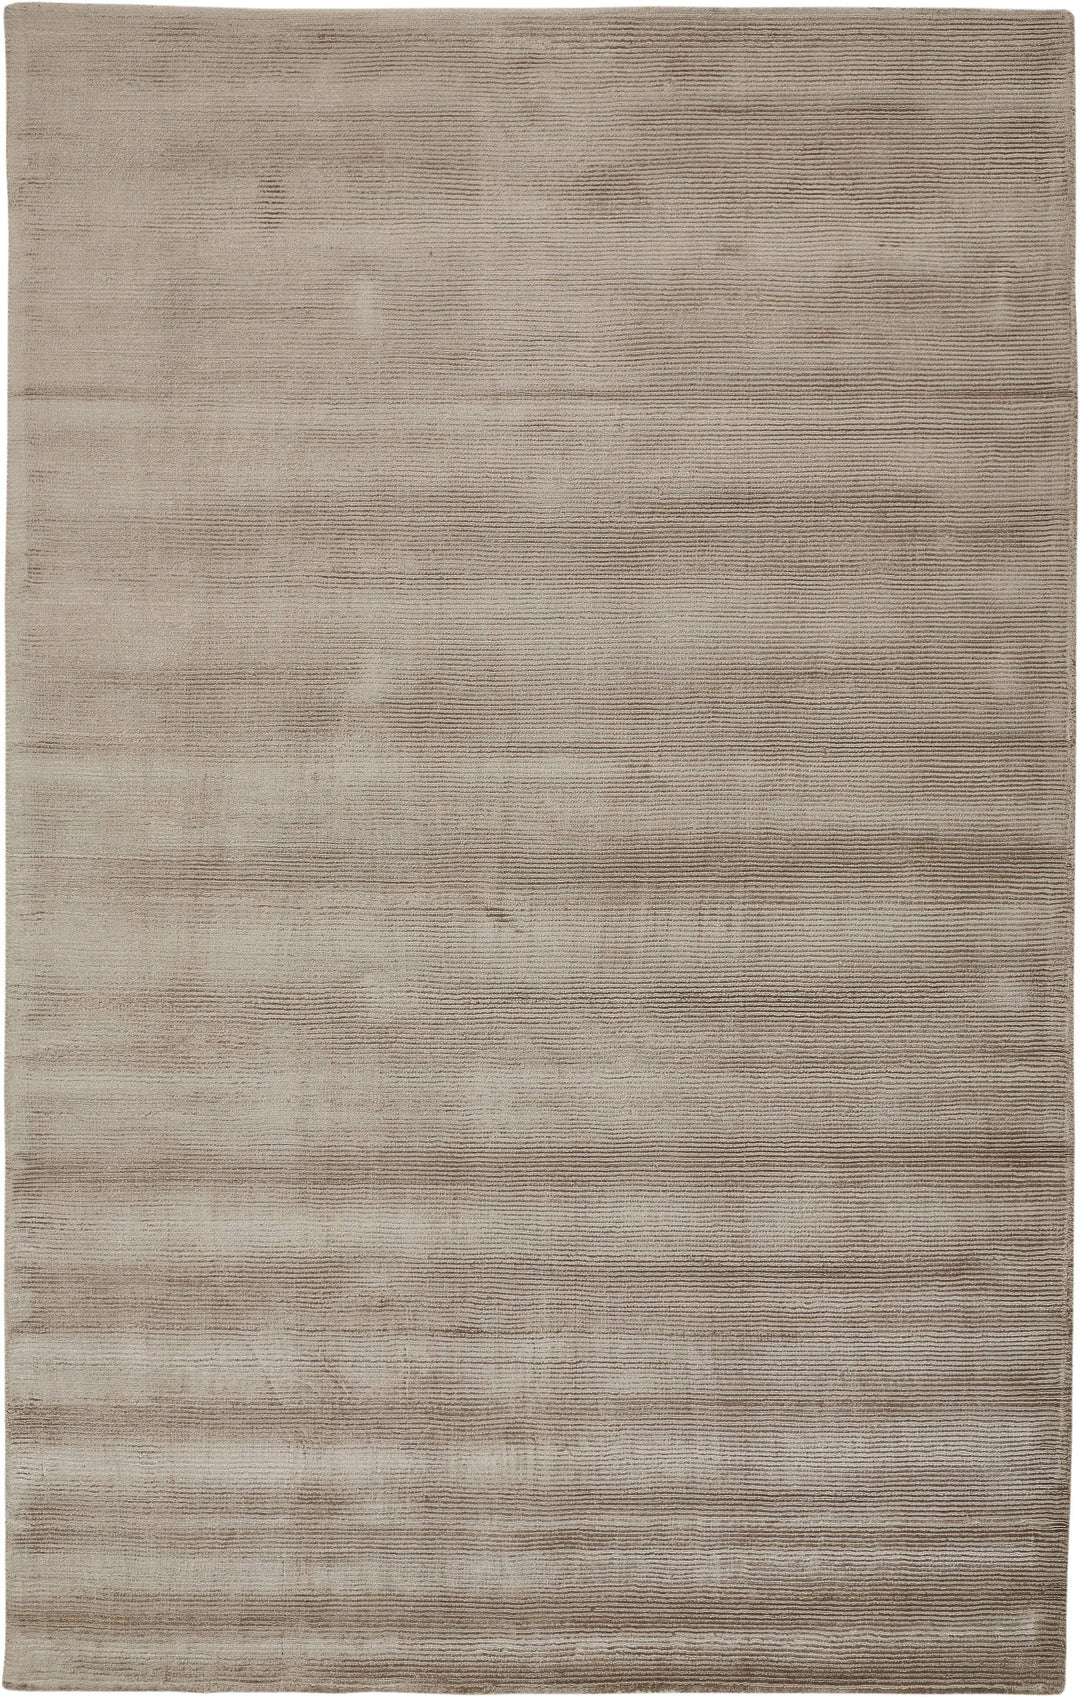 Feizy Feizy Batisse Luxe Viscose Handwoven Rug - Available in 6 Sizes - Mushroom 3'-6" x 5'-6" 6698717FMSH000C50